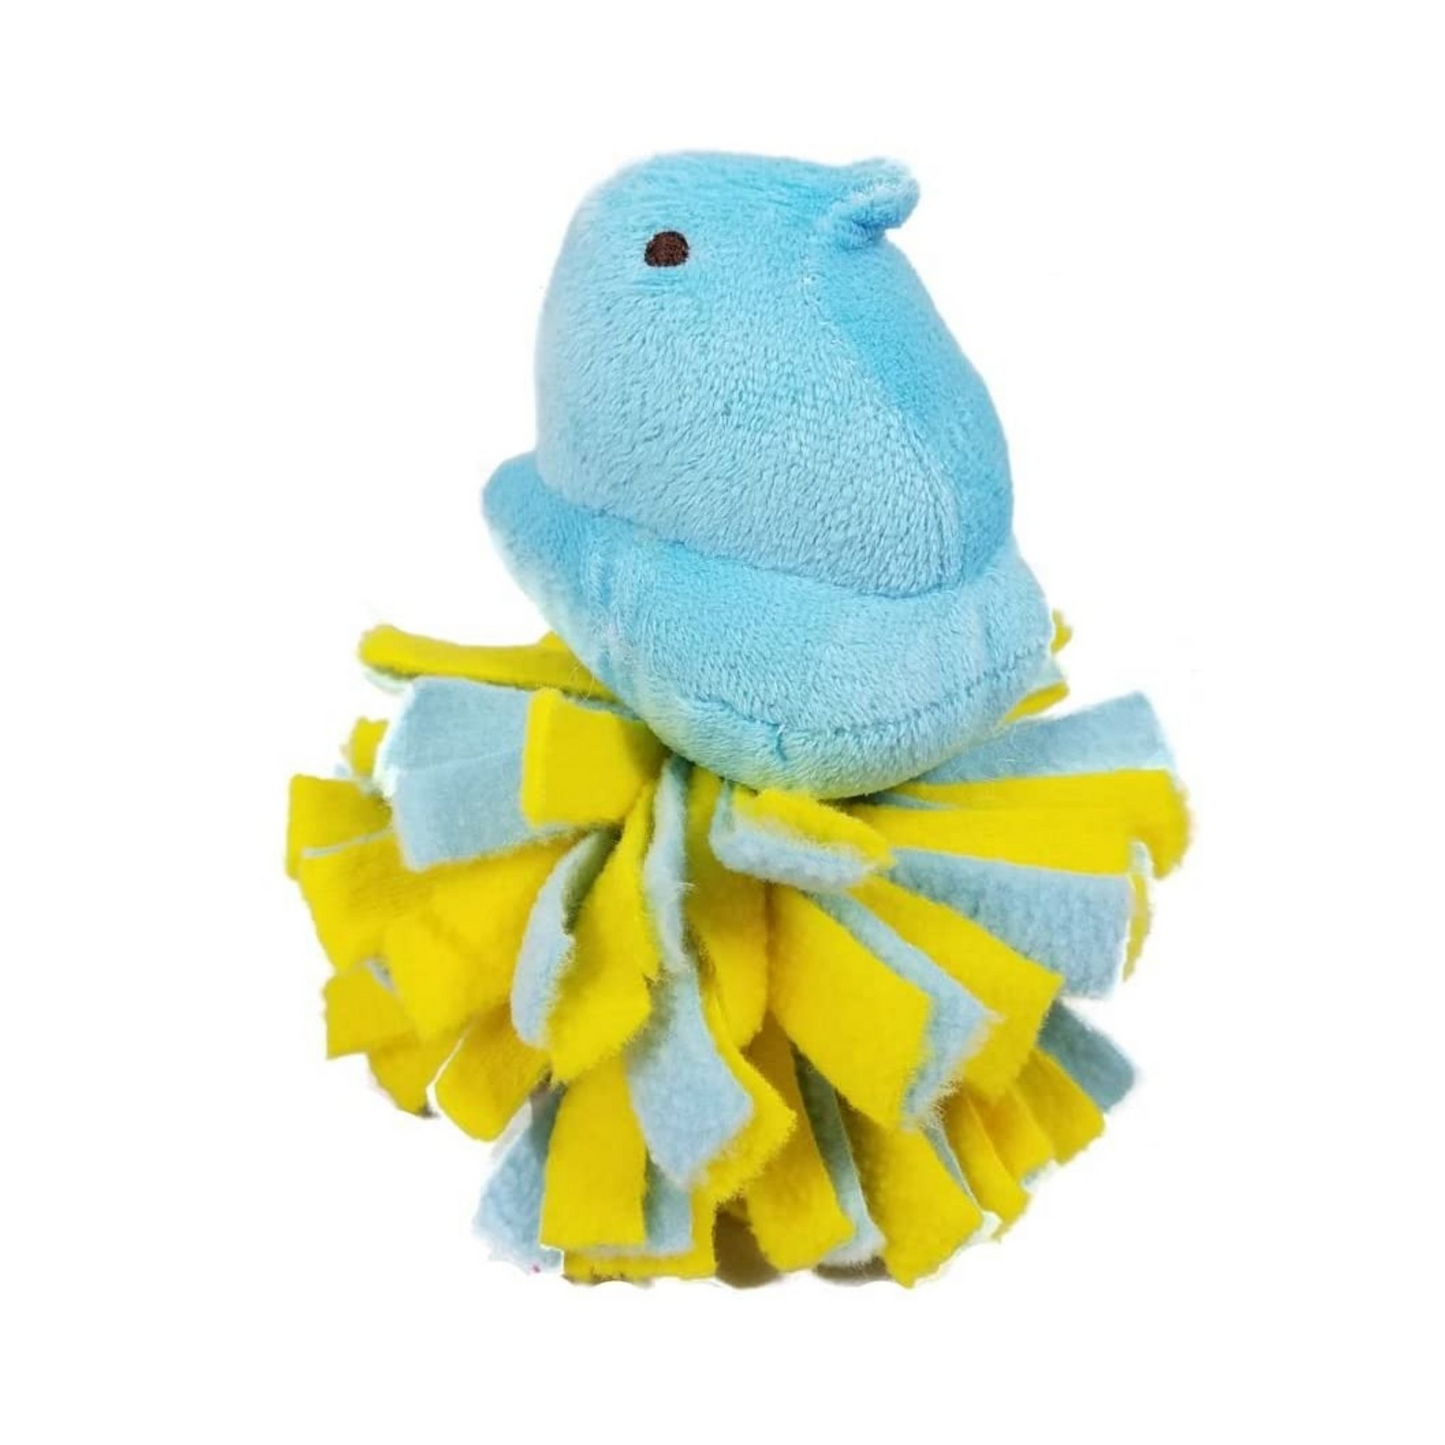 Peeps for Pets Peep Chick Fleece Ball Toy, 4 Count